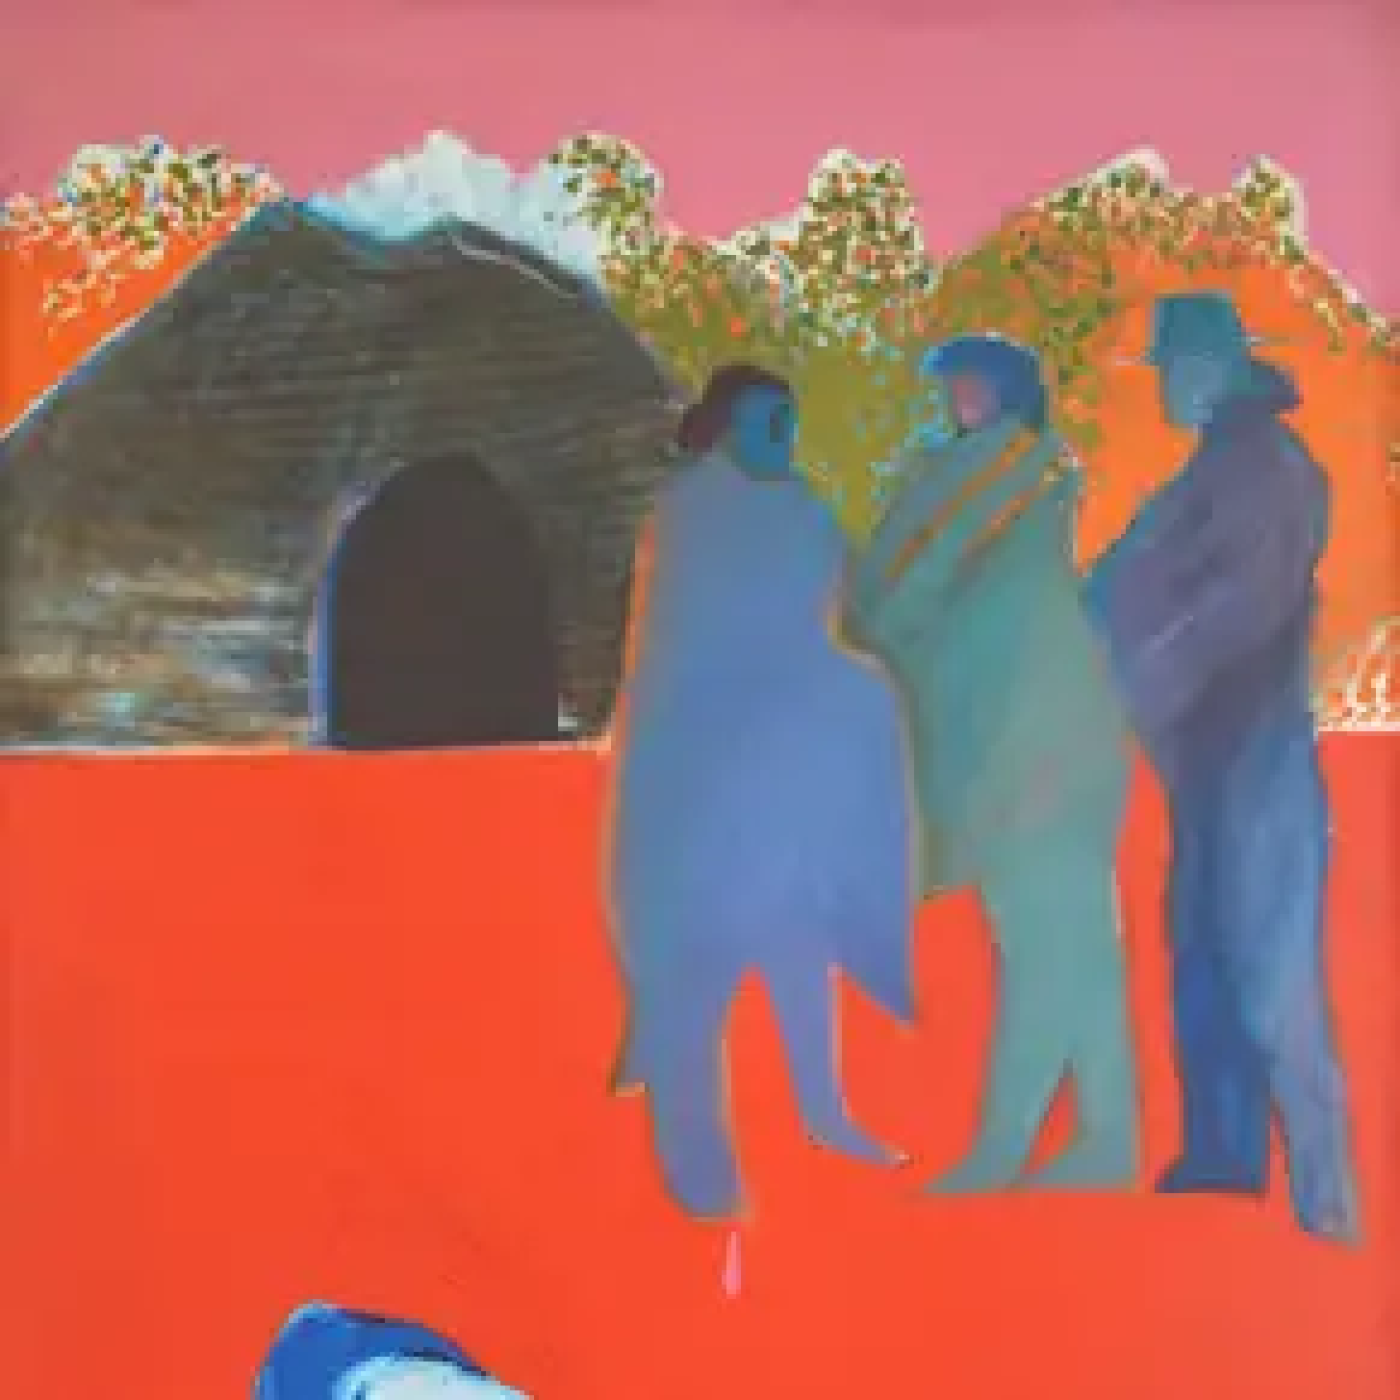 Three Navajos and a Dog (1968) by Fritz Scholder. From the BIA Museum collection.